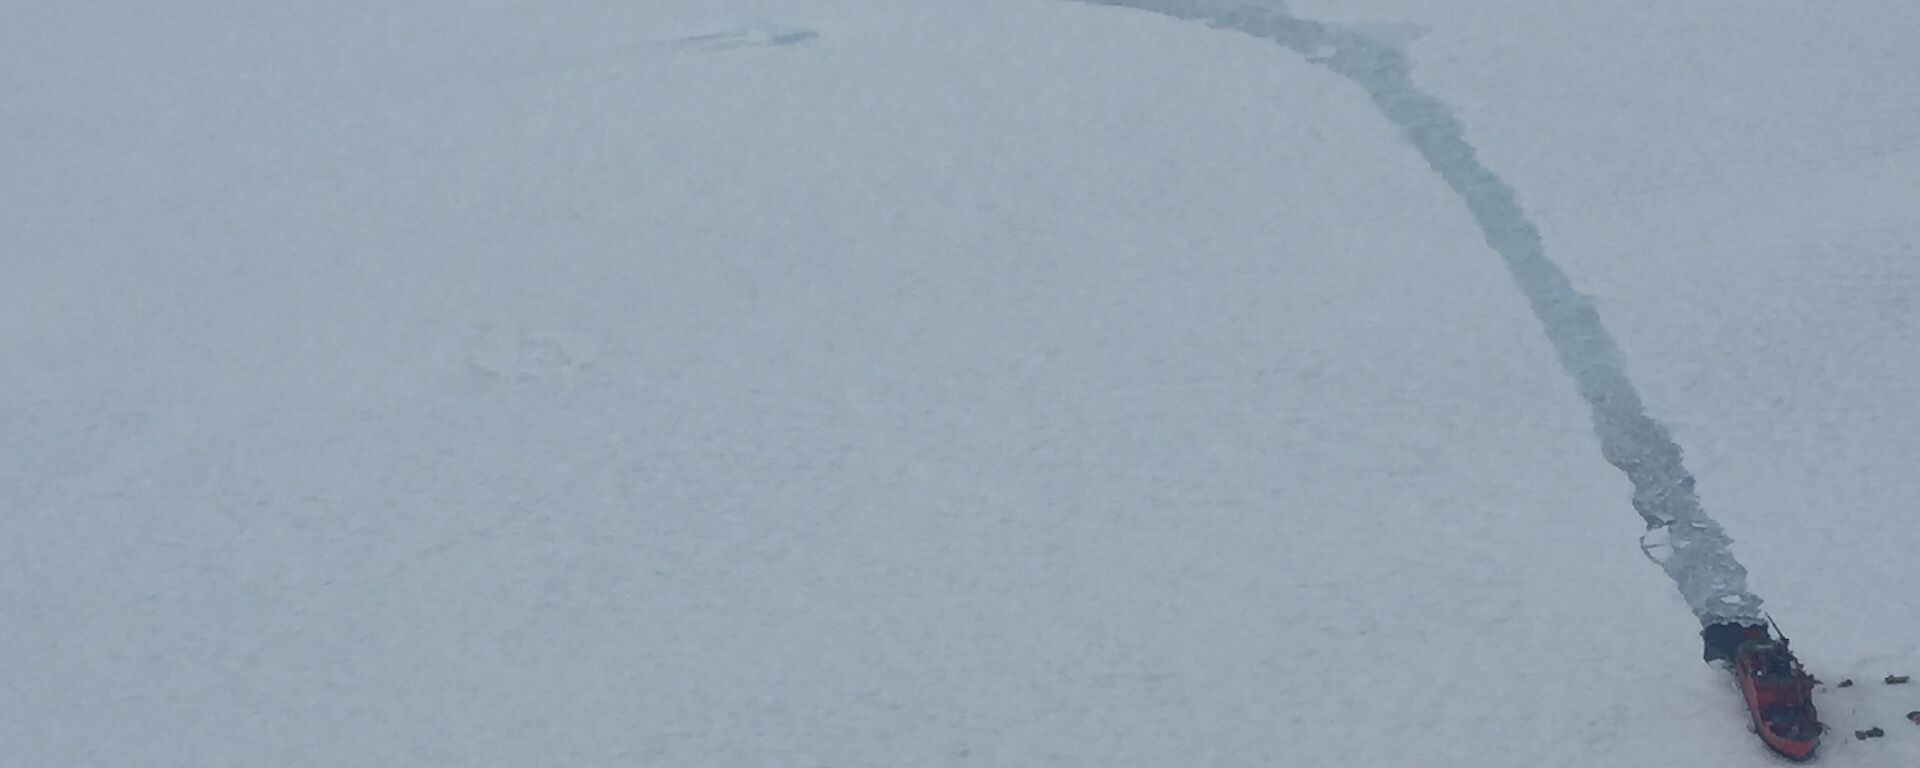 A ship in the sea ice